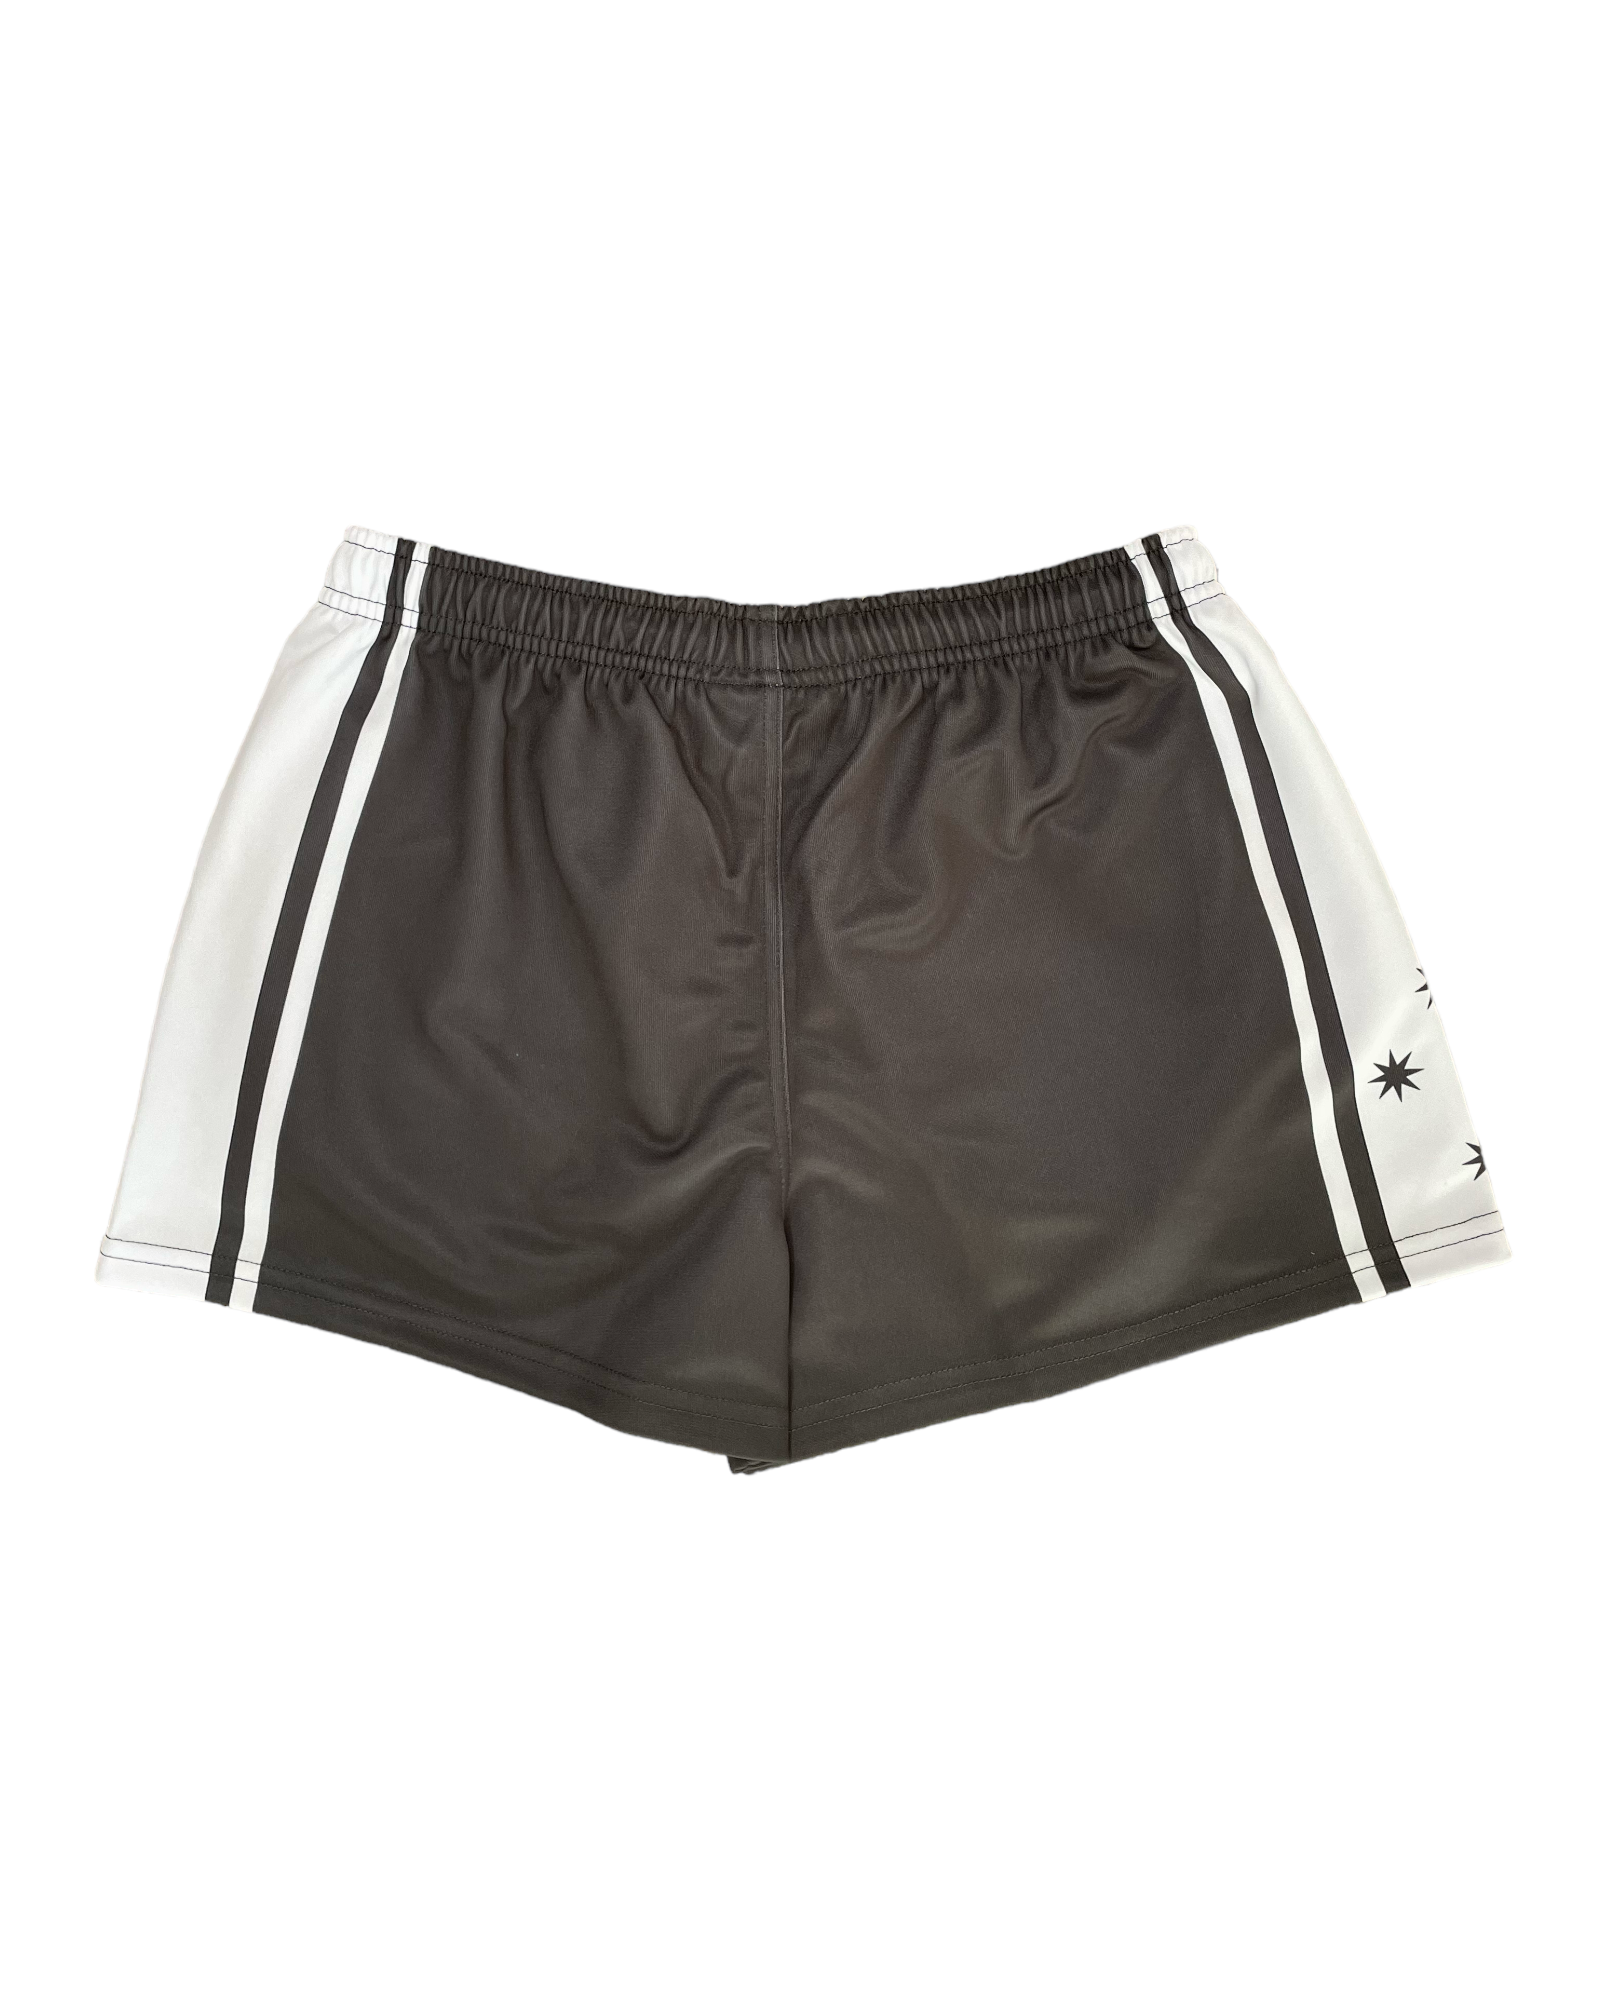 Adults | Footy Shorts | Heritage | Charcoal